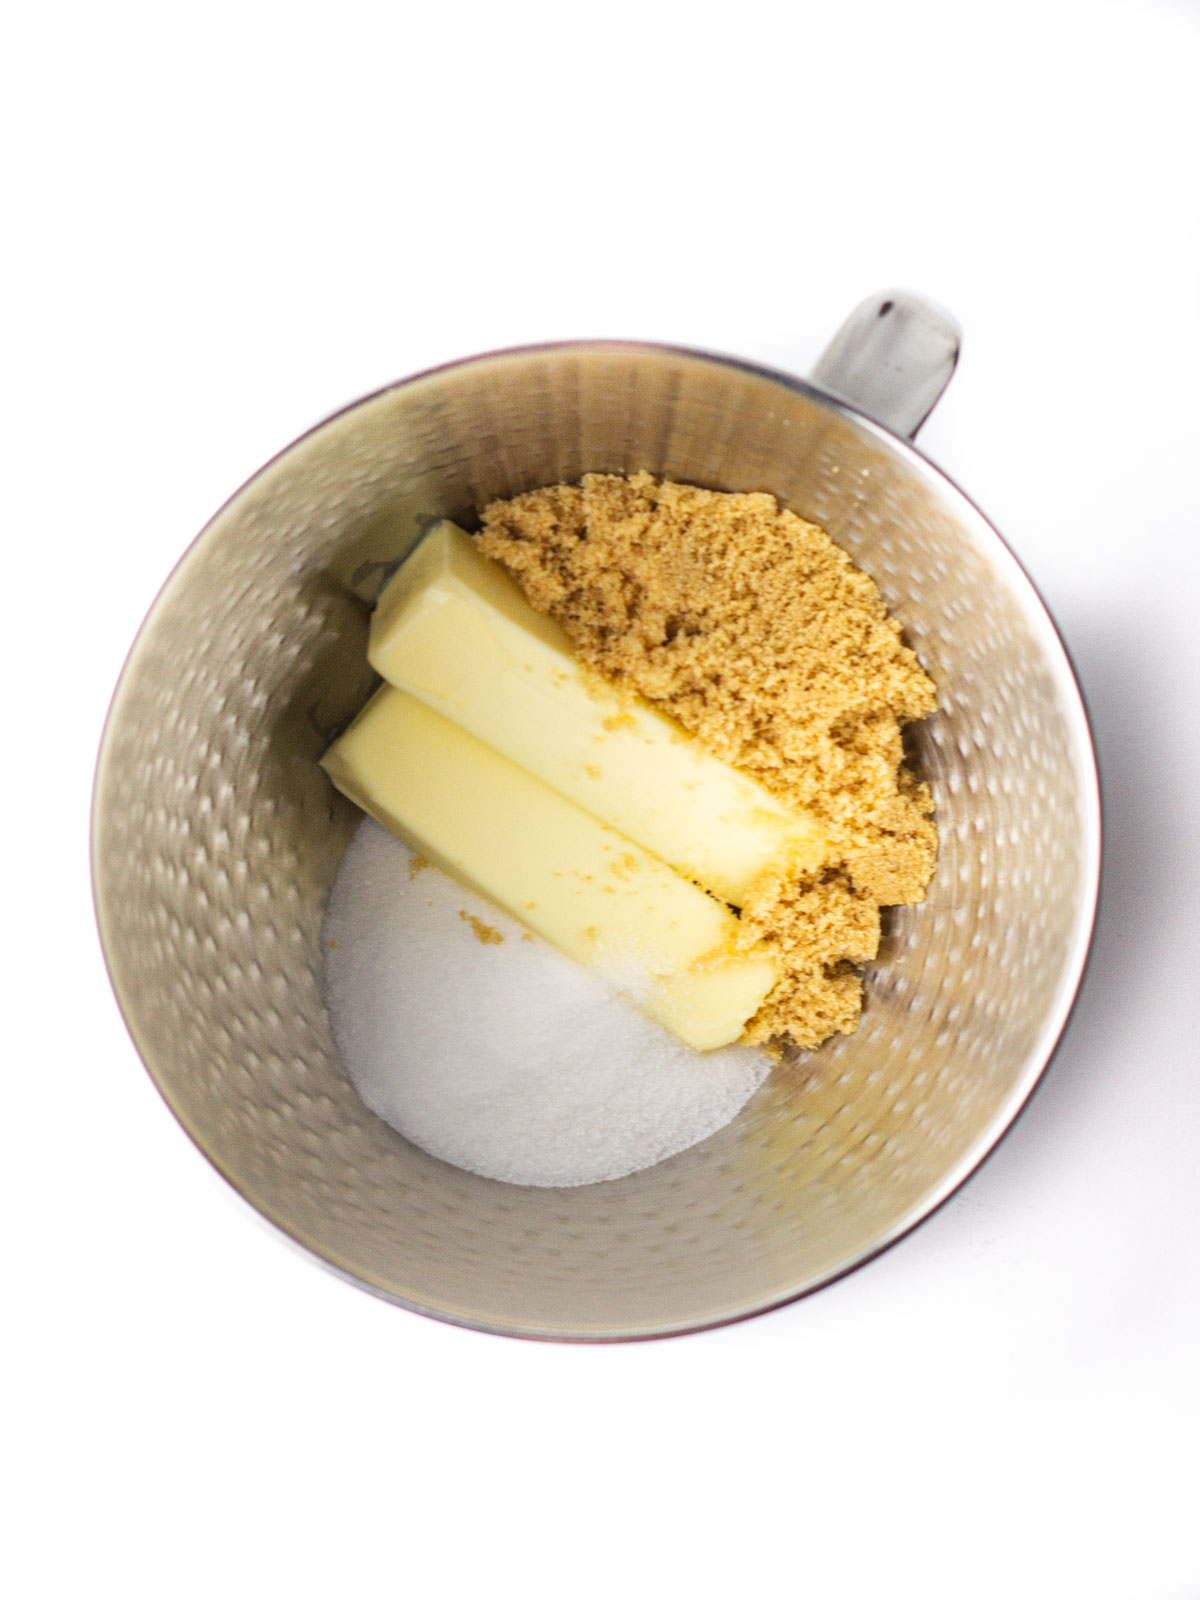 Two sticks of butter, sugar, and brown sugar in a silver textured mixing bowl.